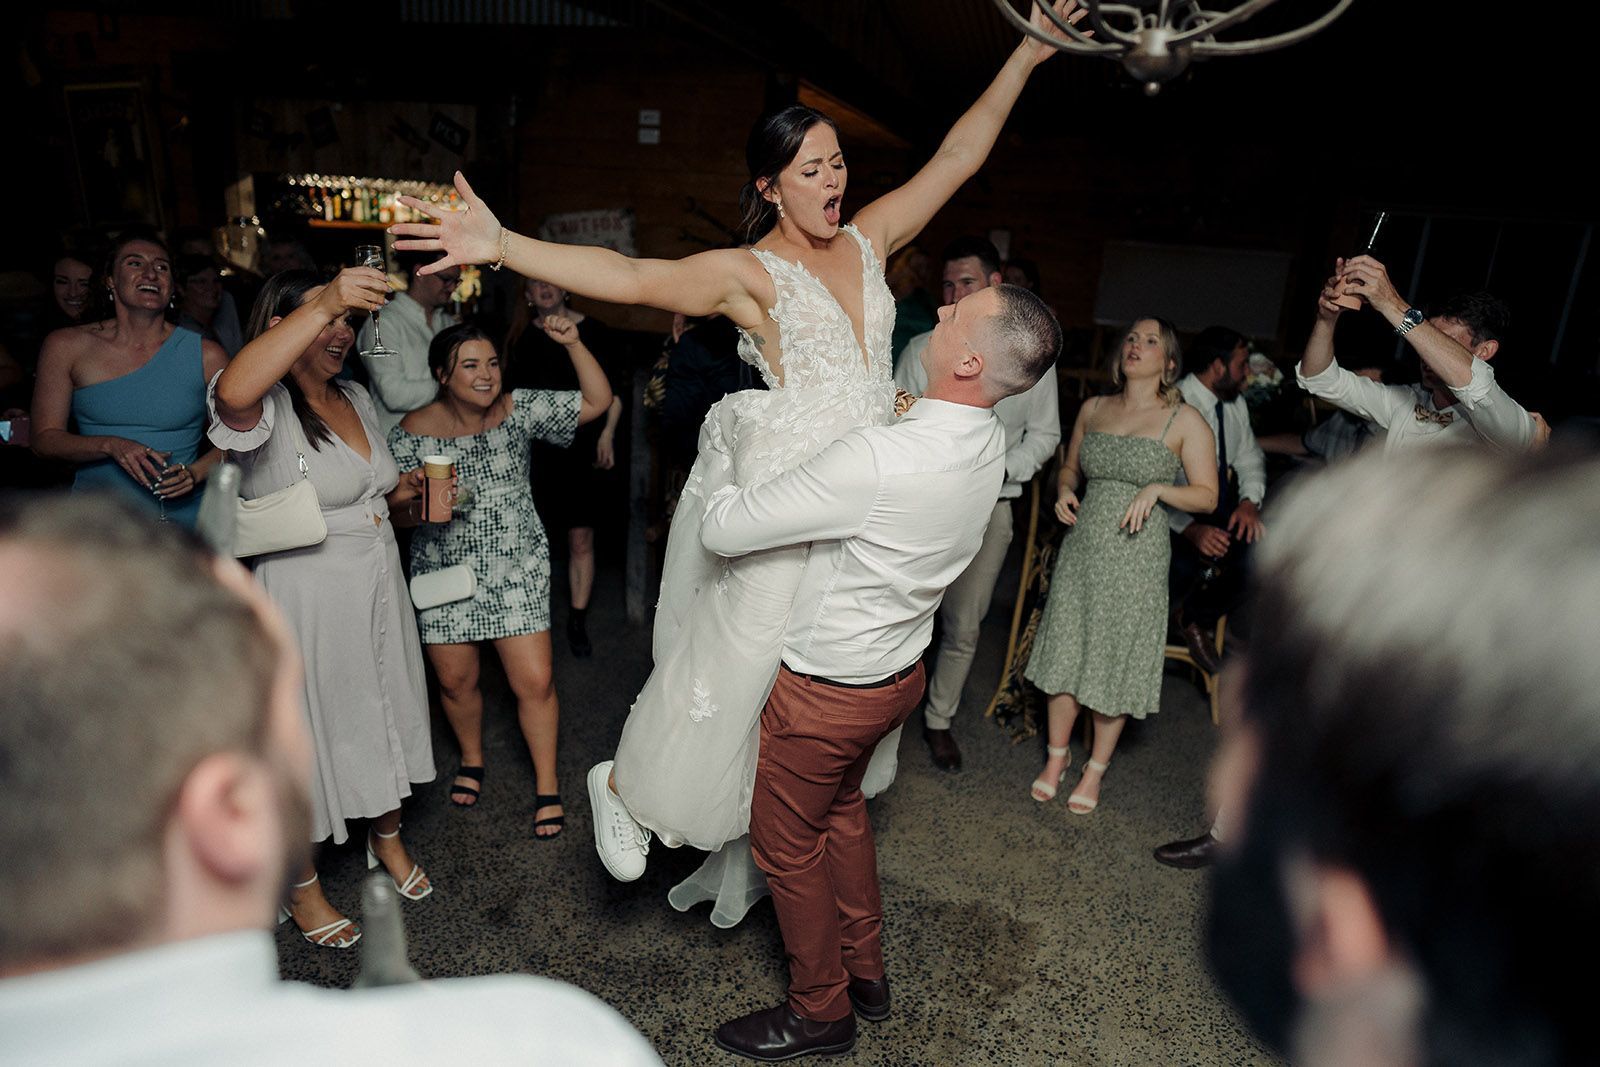 Bride being held in the air during a dance